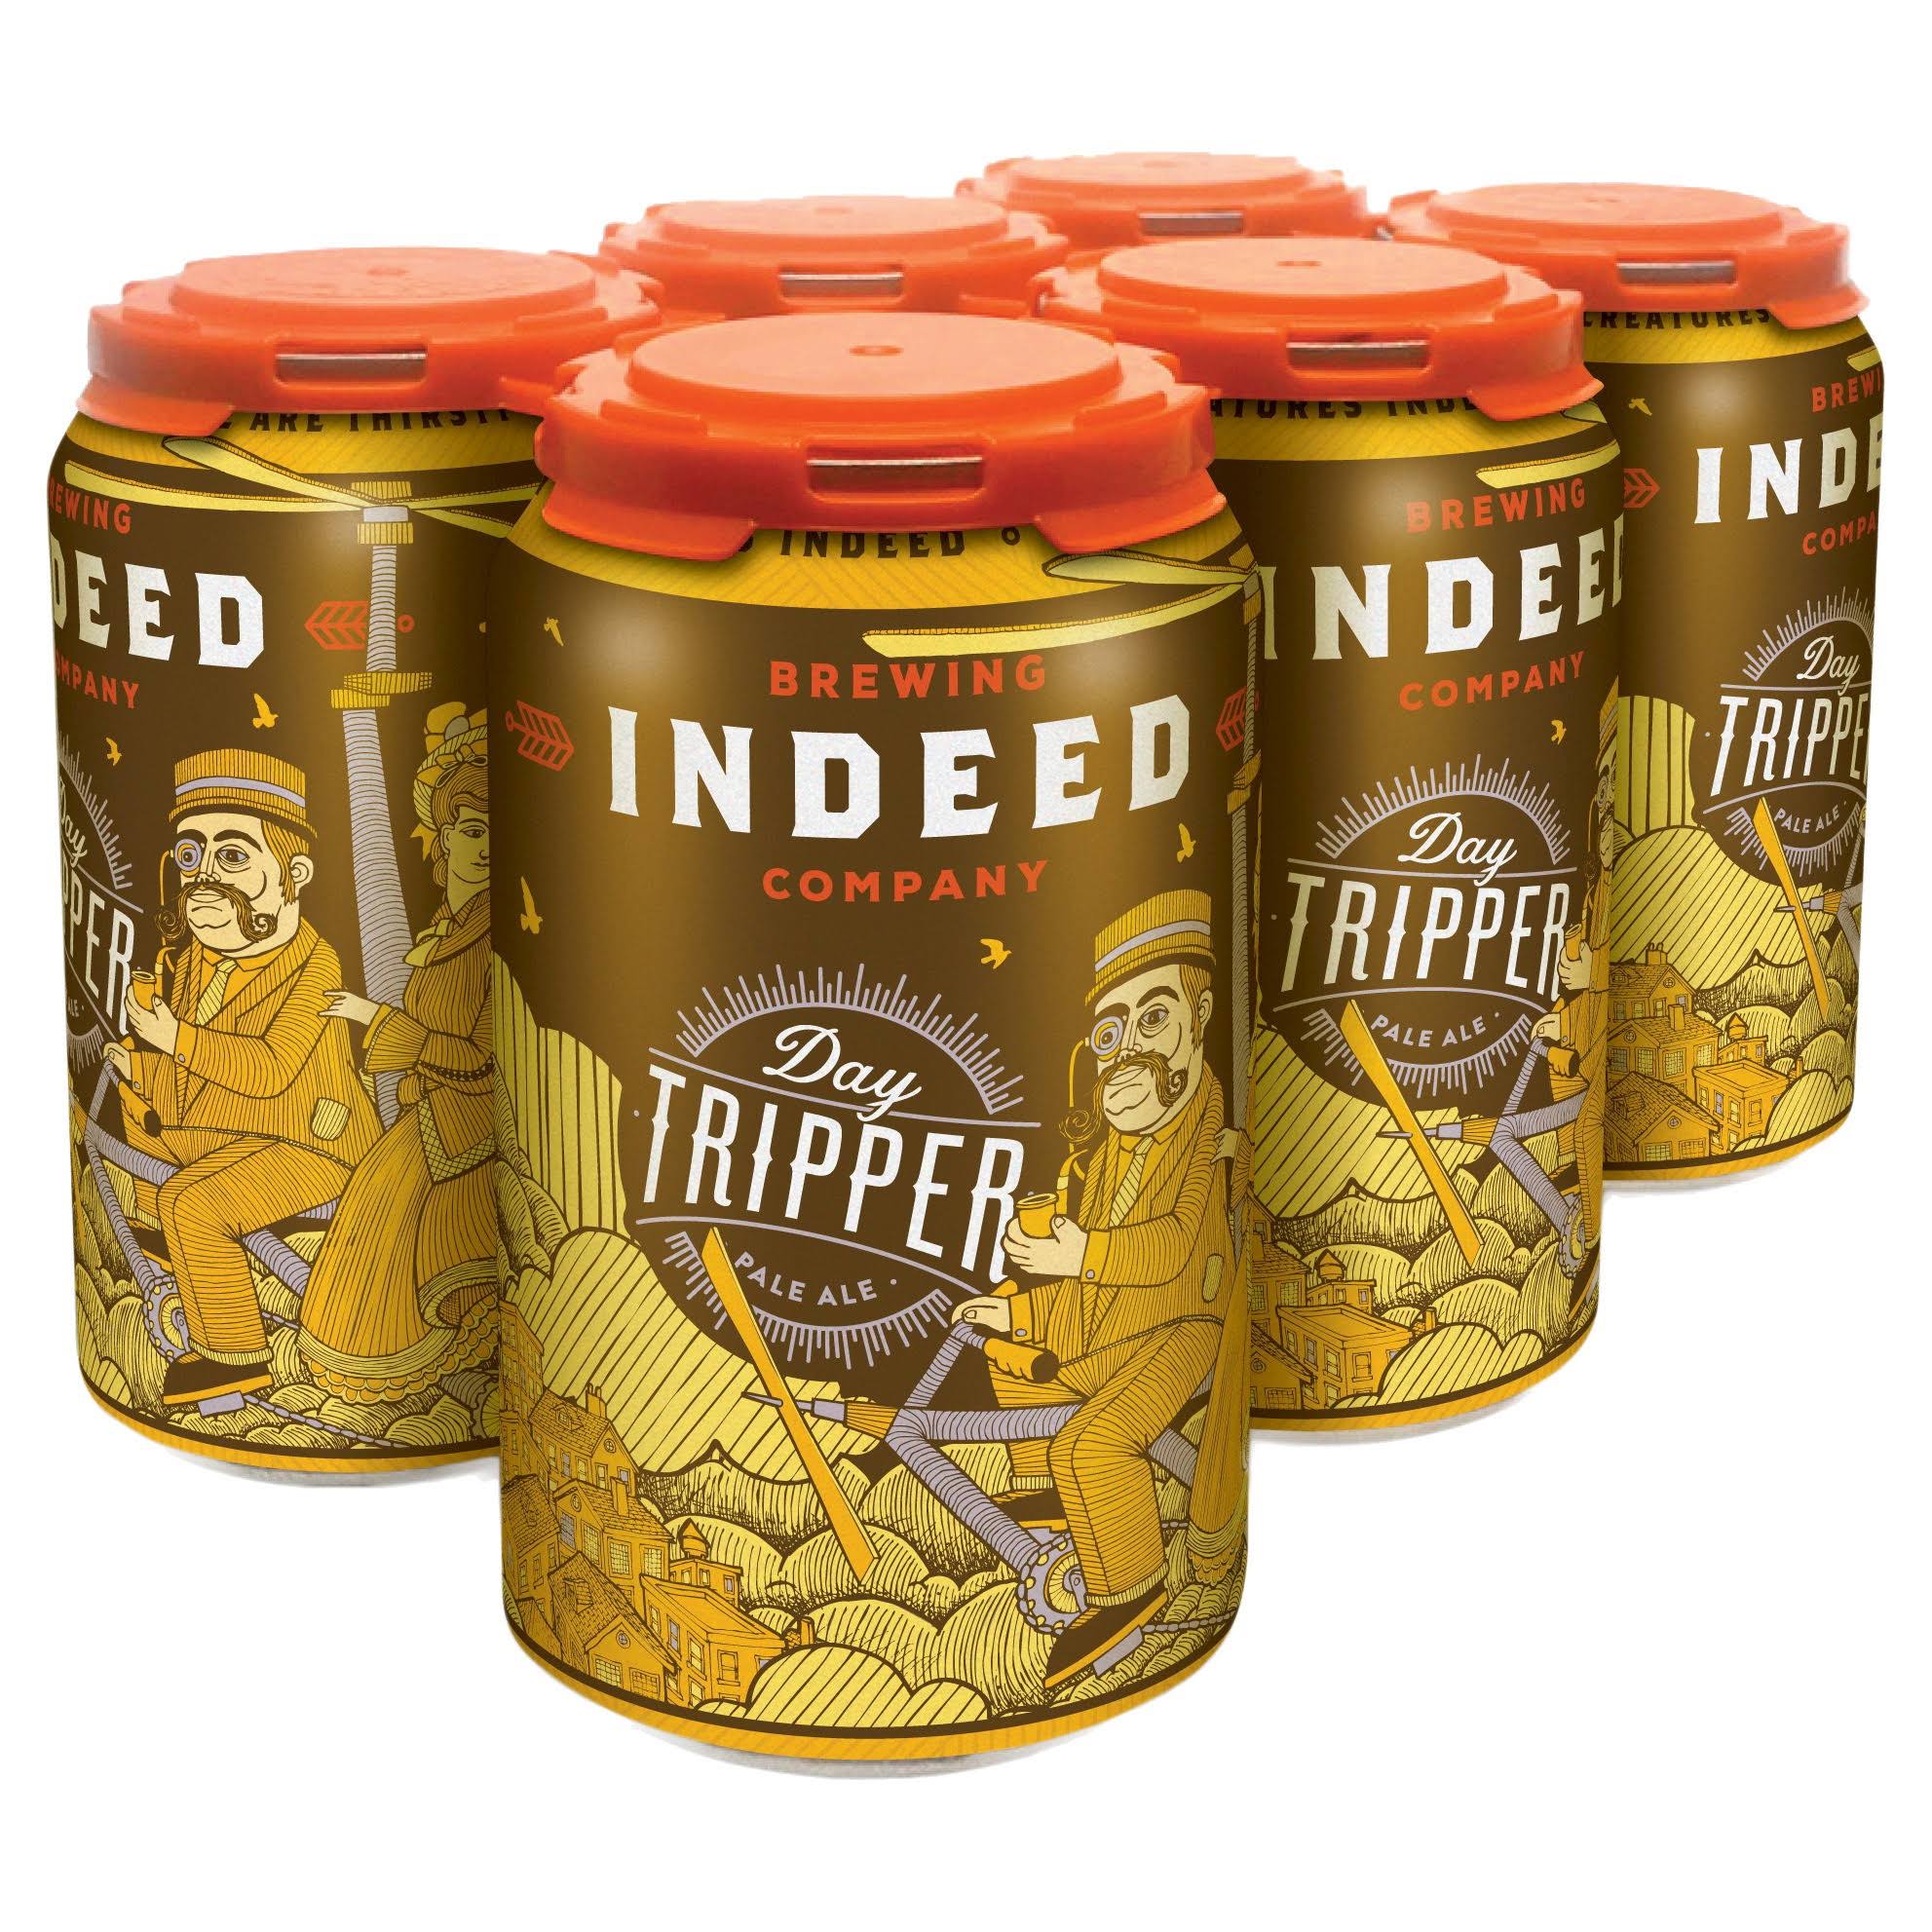 Day Tripper Pale Ale Beer - Indeed Brewing Company, 12oz, 6 Pack